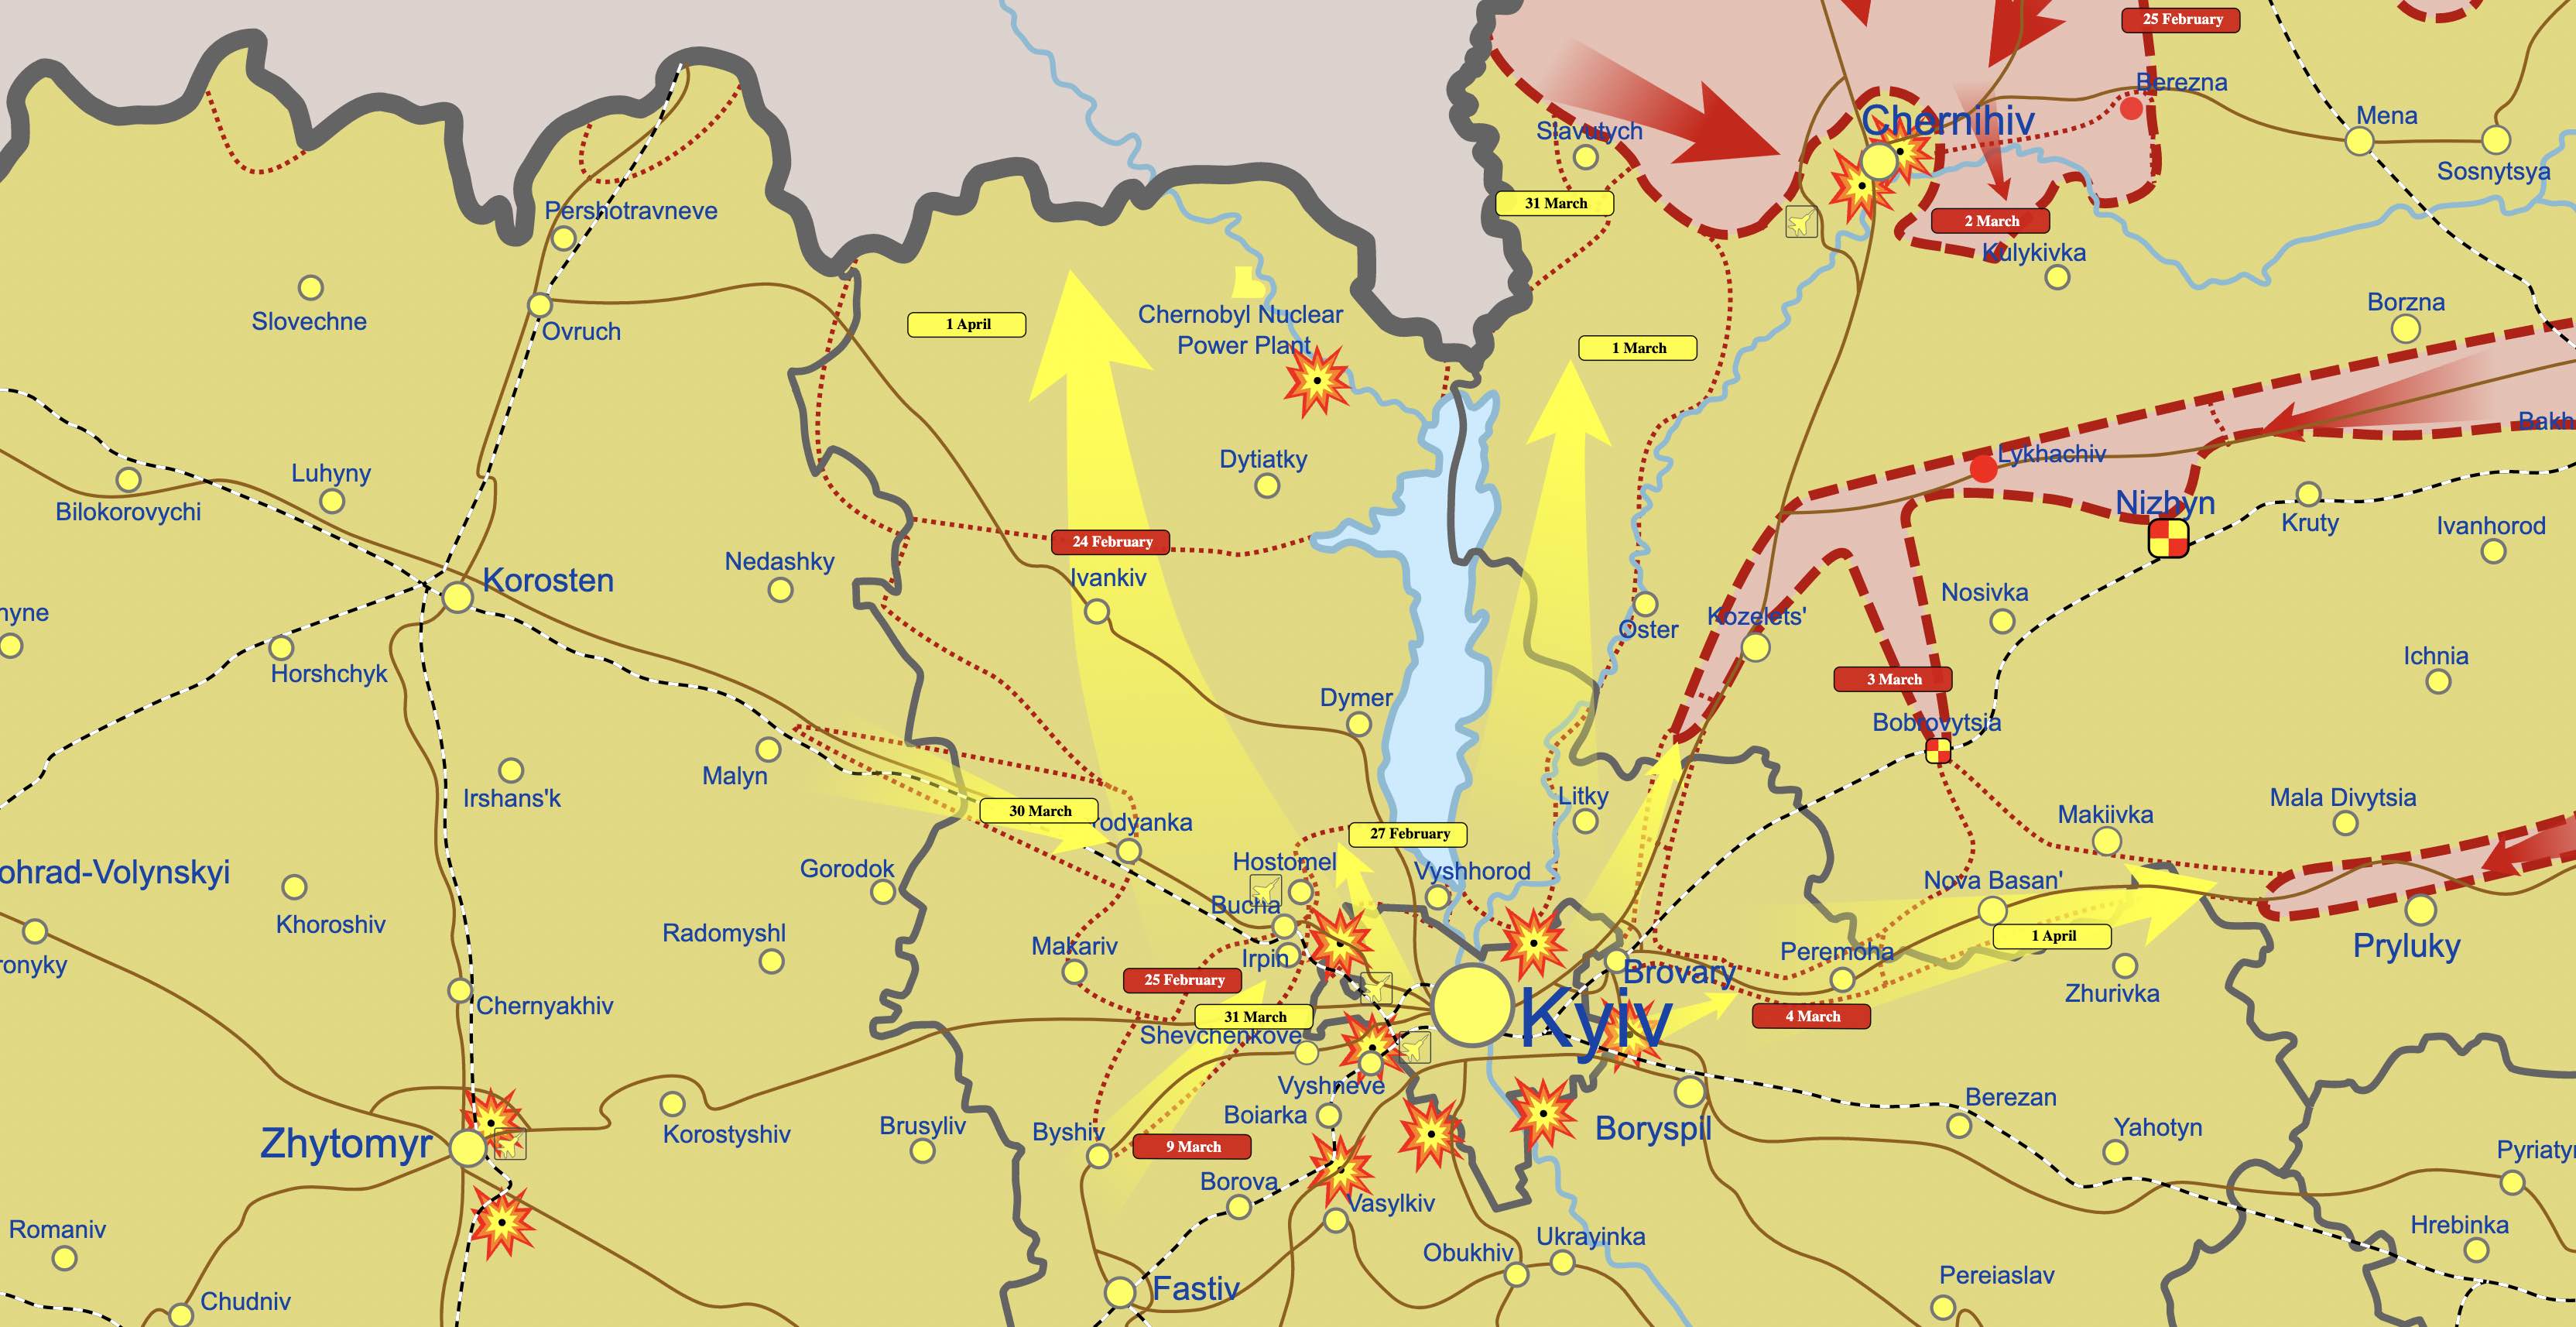 Defeated in Kyiv, Russia Downsizes War Aims to Donbas and Southern Ukraine